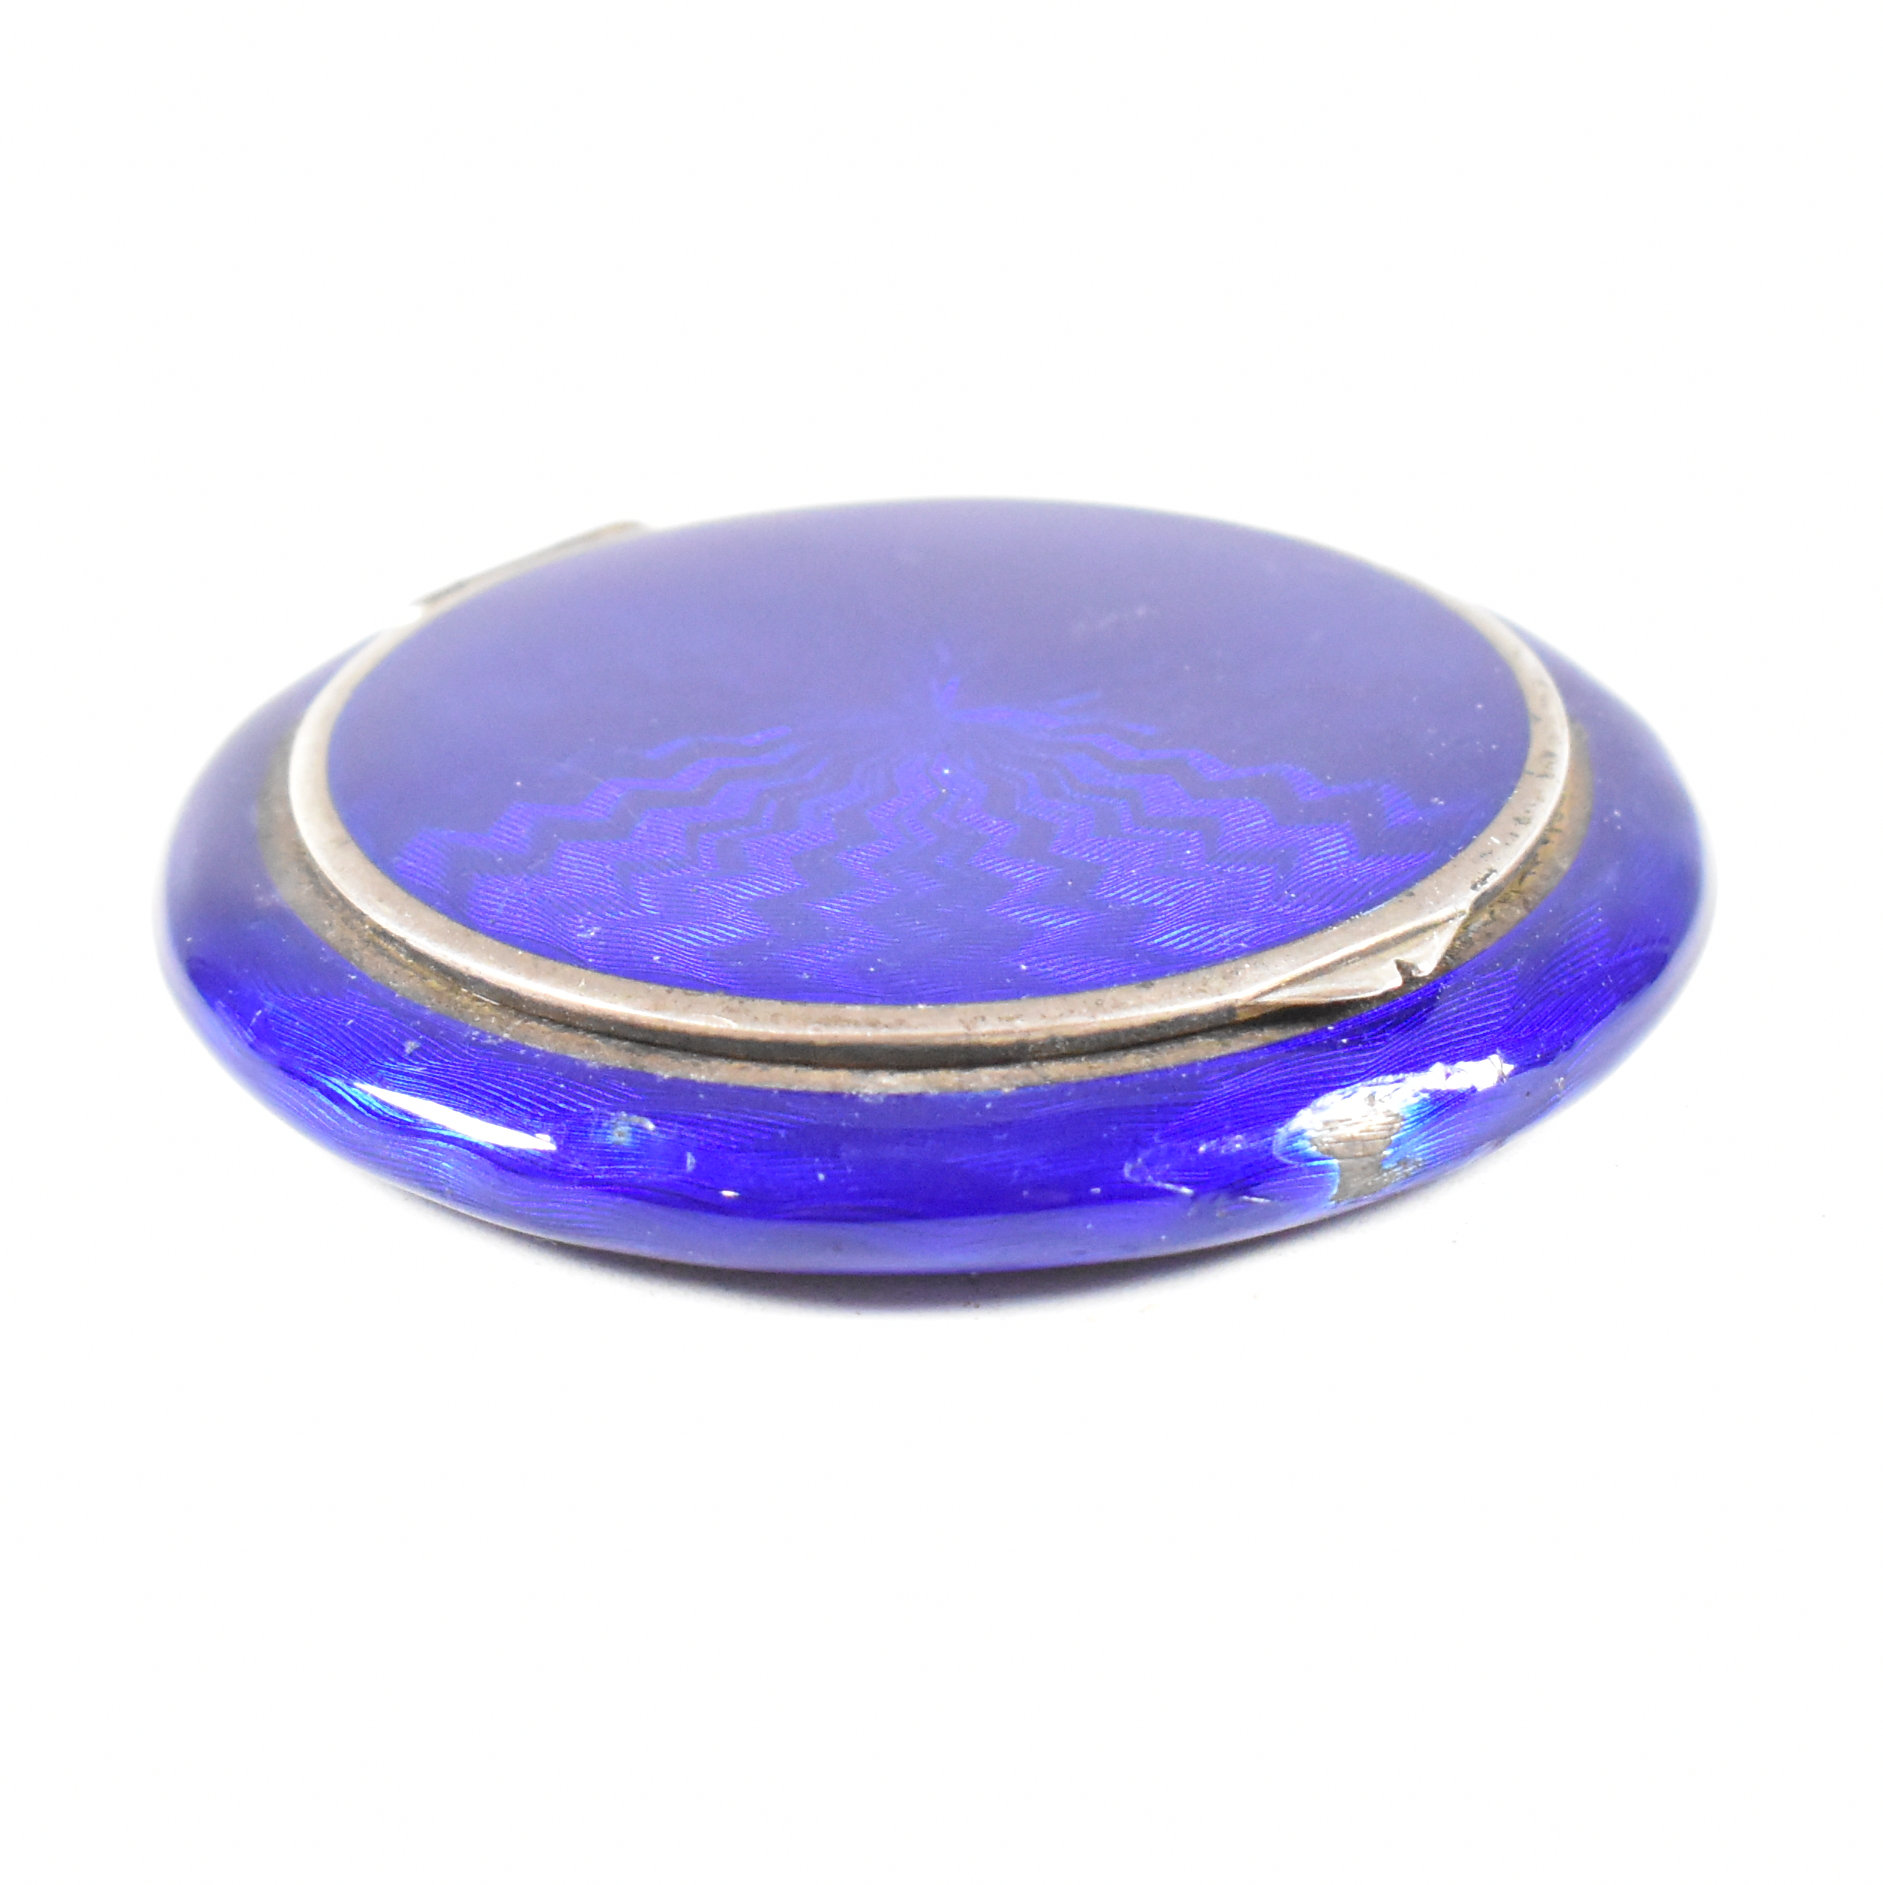 CONTINENTAL 925 SILVER & GUILLOCHE ENAMEL POWDER COMPACT - Image 2 of 8